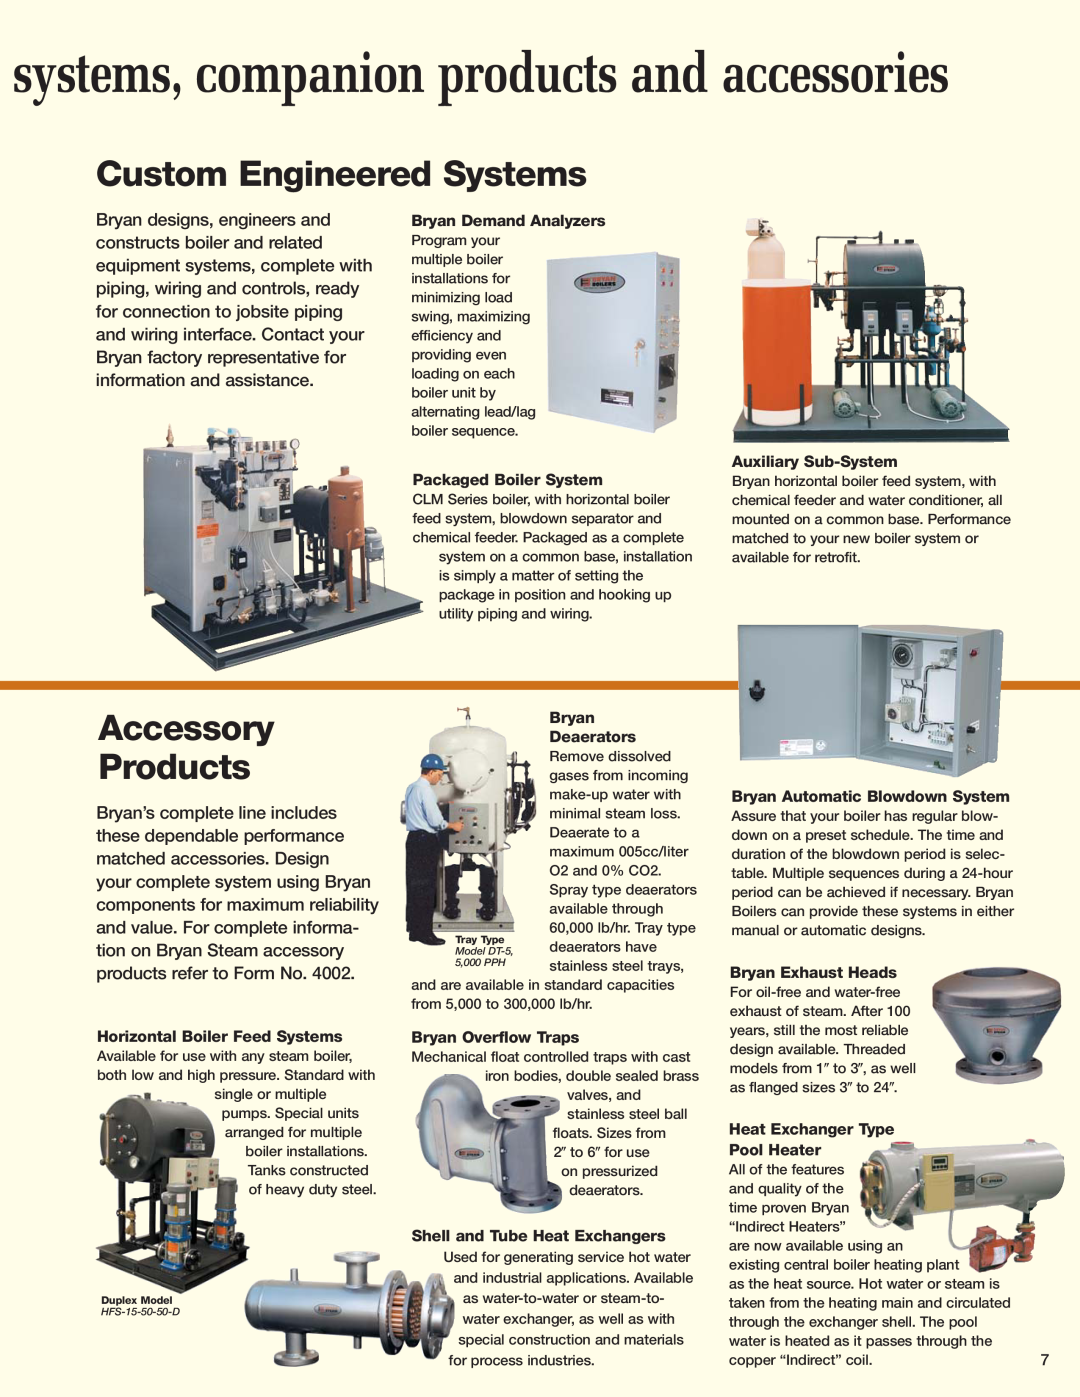 Bryan Boilers Flexible Water Tube Boilers manual systems, companion products and accessories, Custom Engineered Systems 